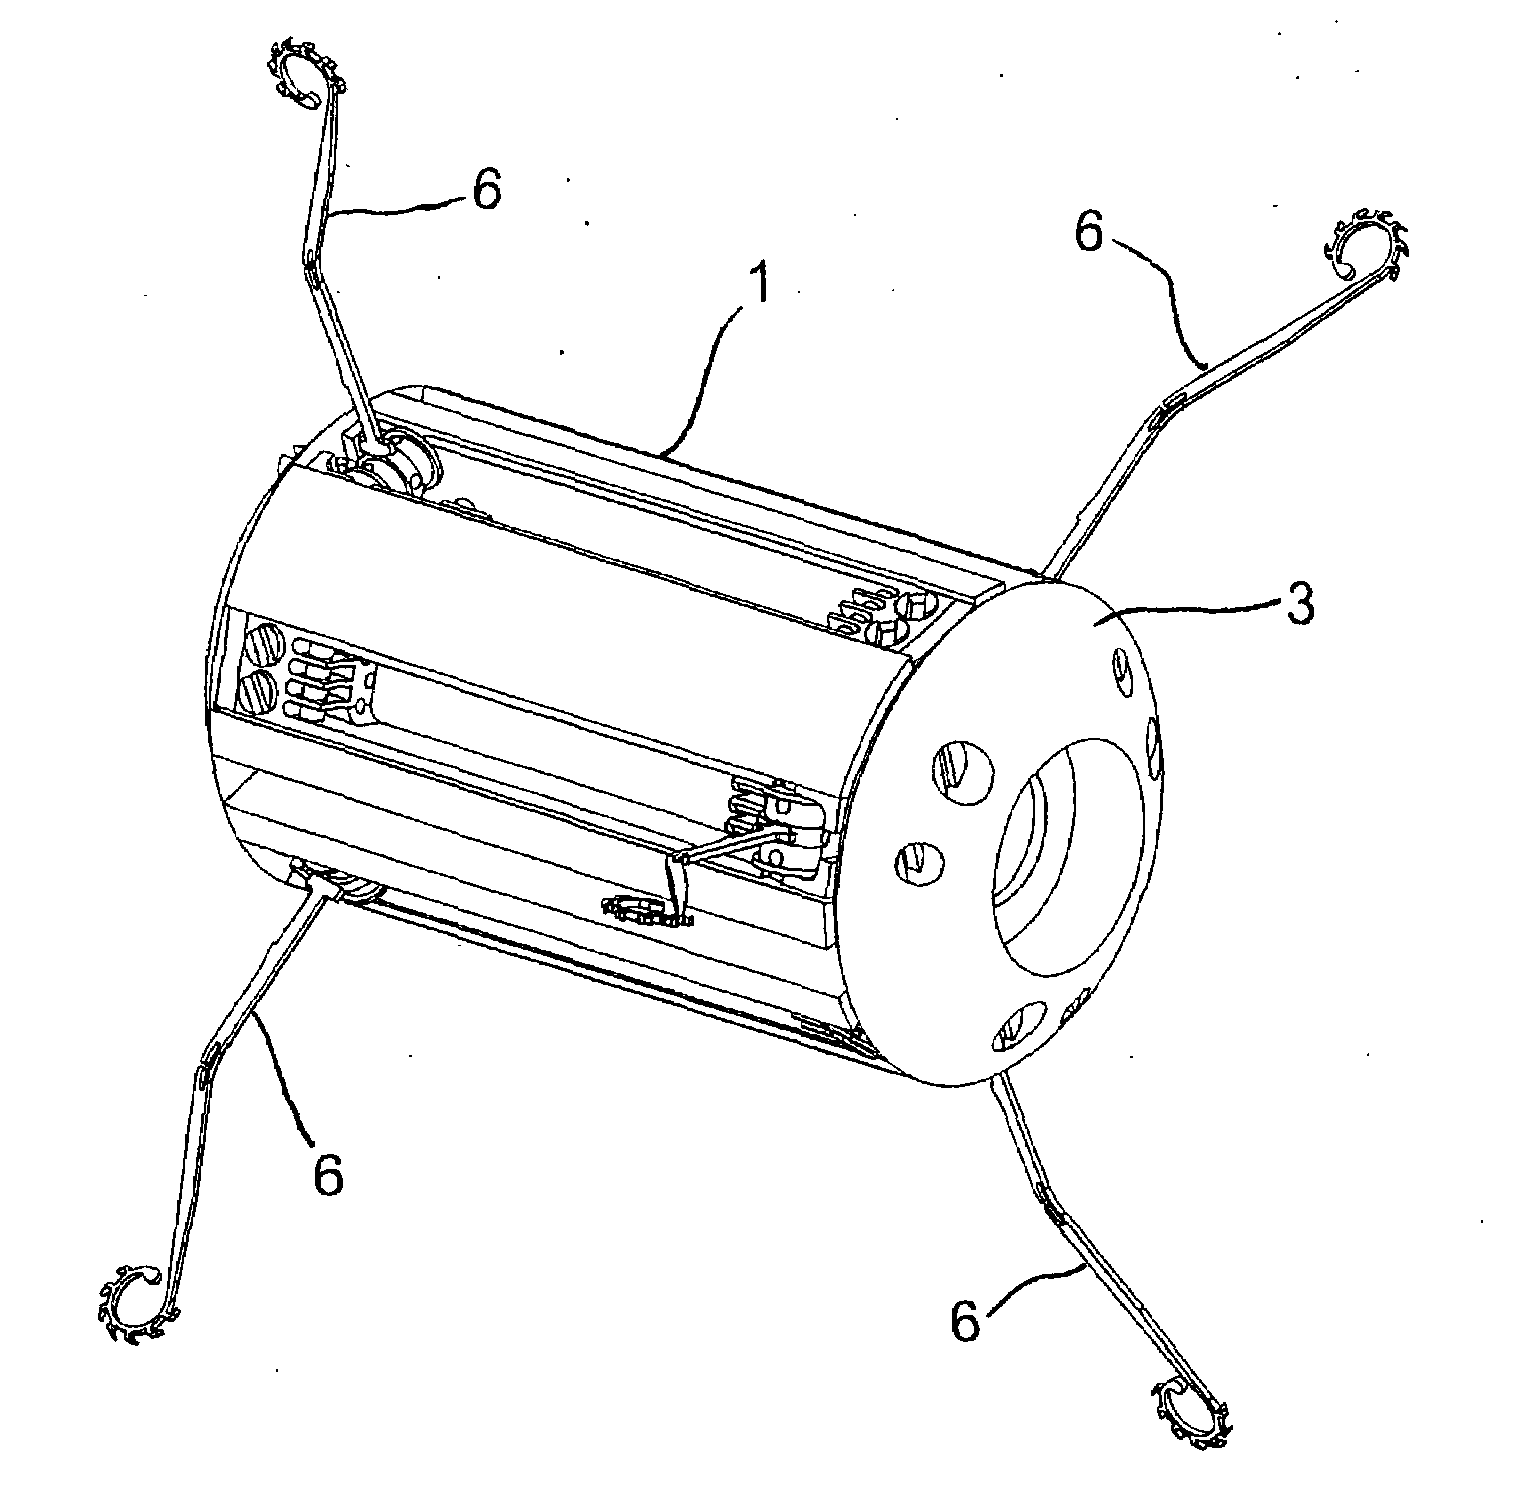 Teleoperated Endoscopic Capsule Equipped With Active Locomotion System